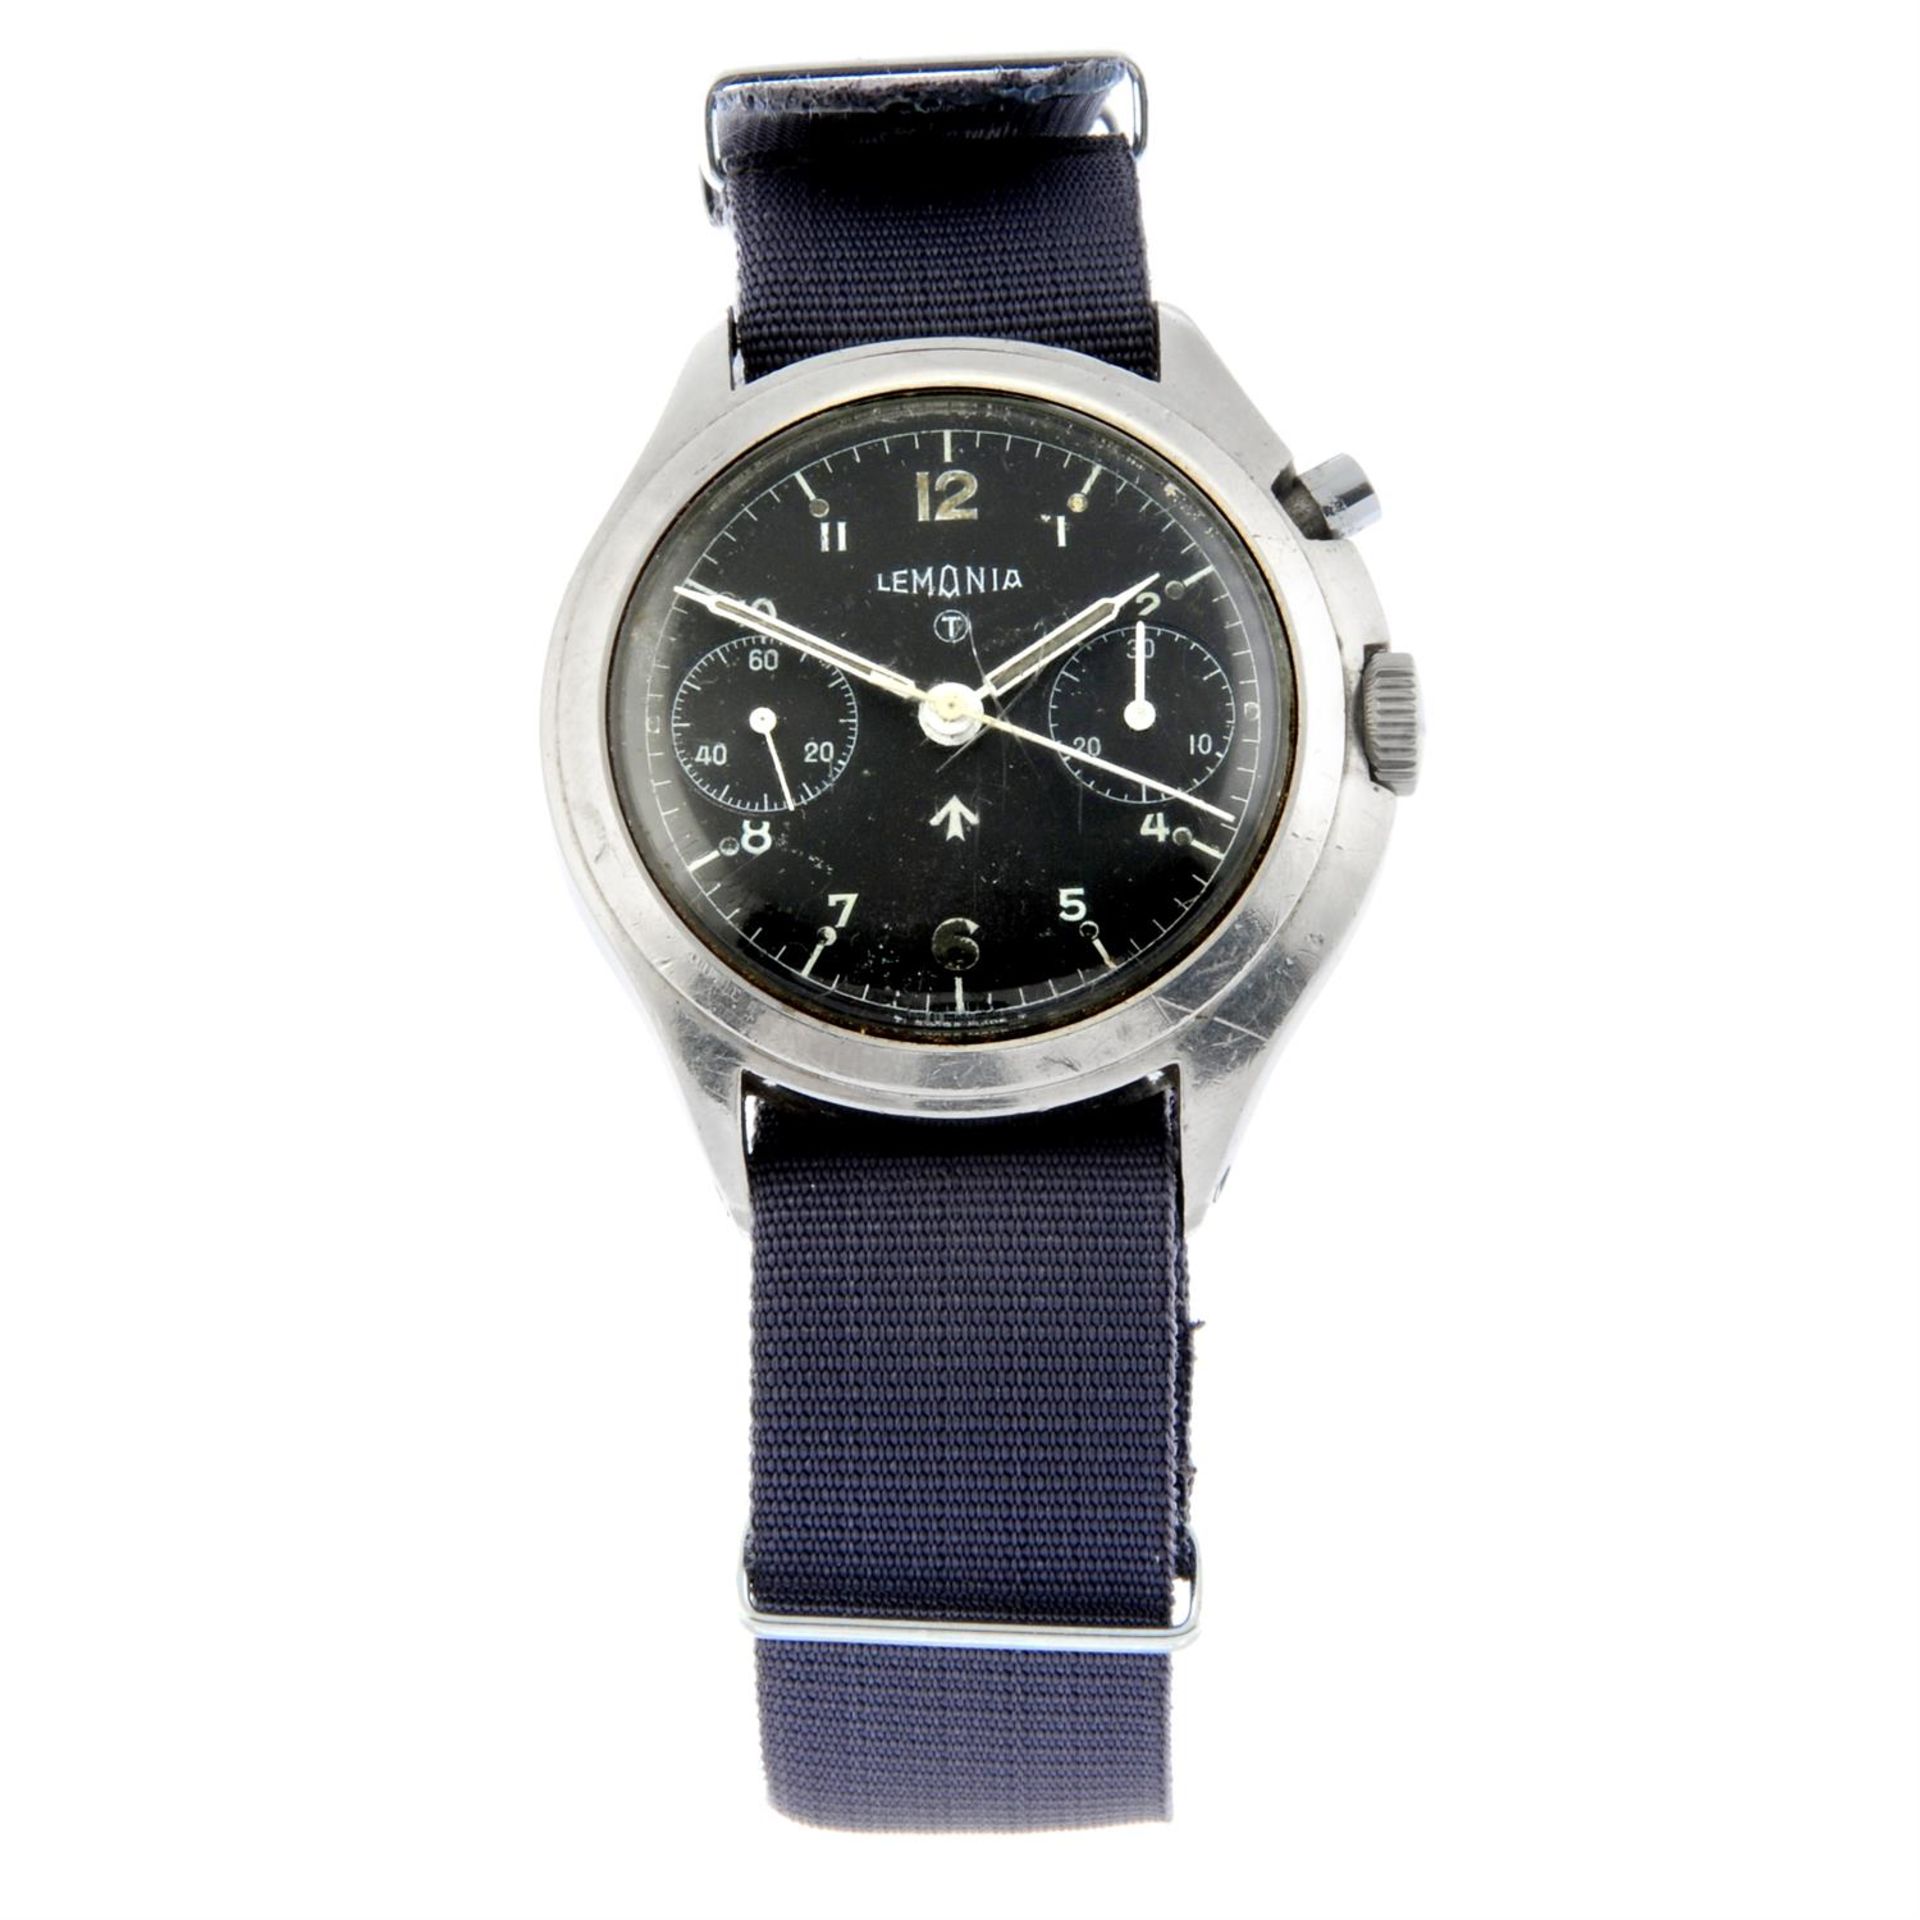 Lemania - a military issue chronograph watch, 40mm.